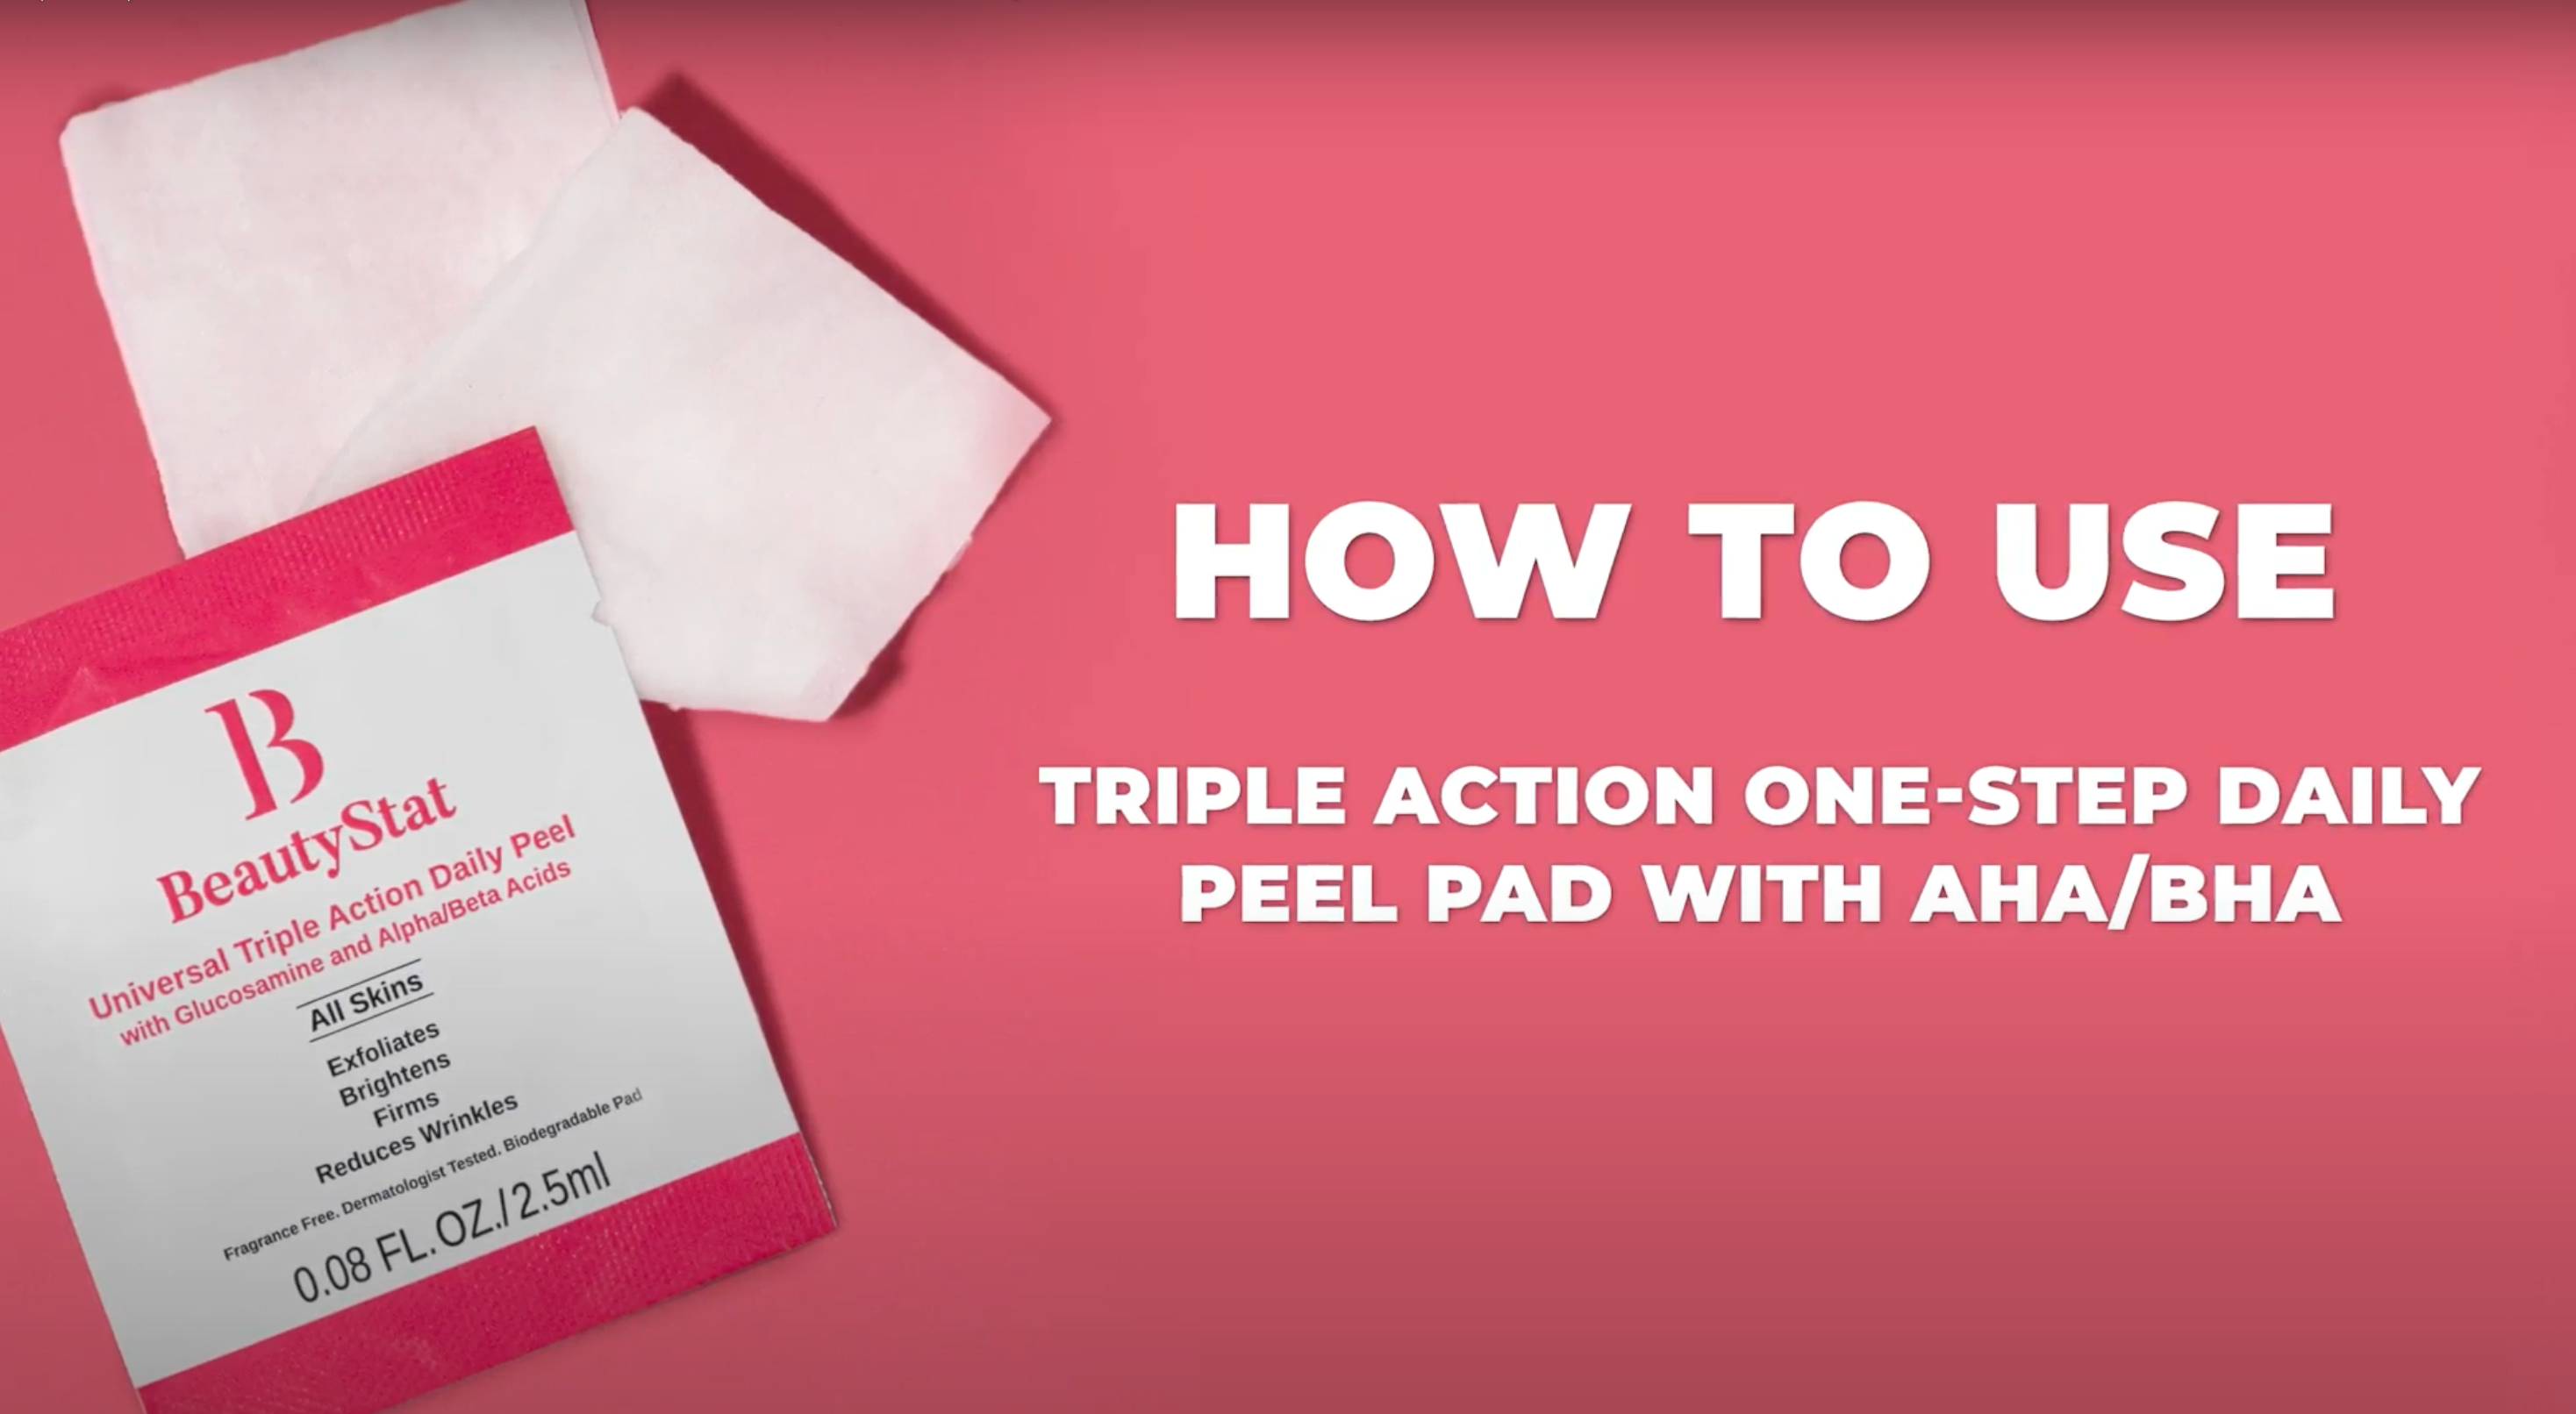 Load video: How To Use Triple Action One-Step Daily Peel Pad with AHA/ BHA